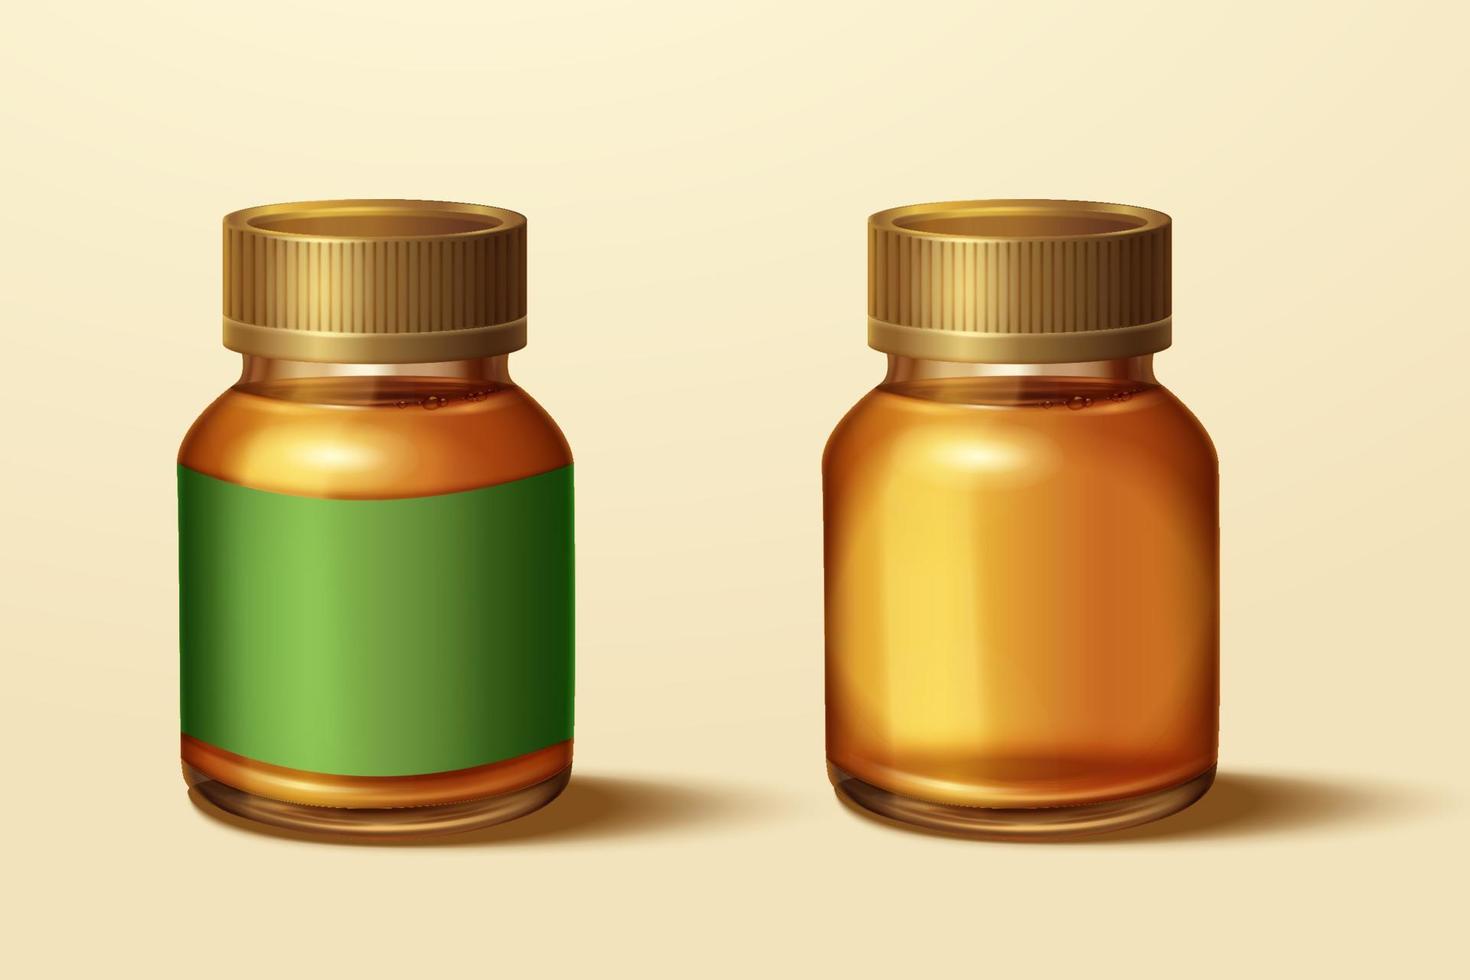 Bottles of essence of chicken. 3D mockups of two containers full of essence of chicken isolated on beige background, one with a green label and one without vector